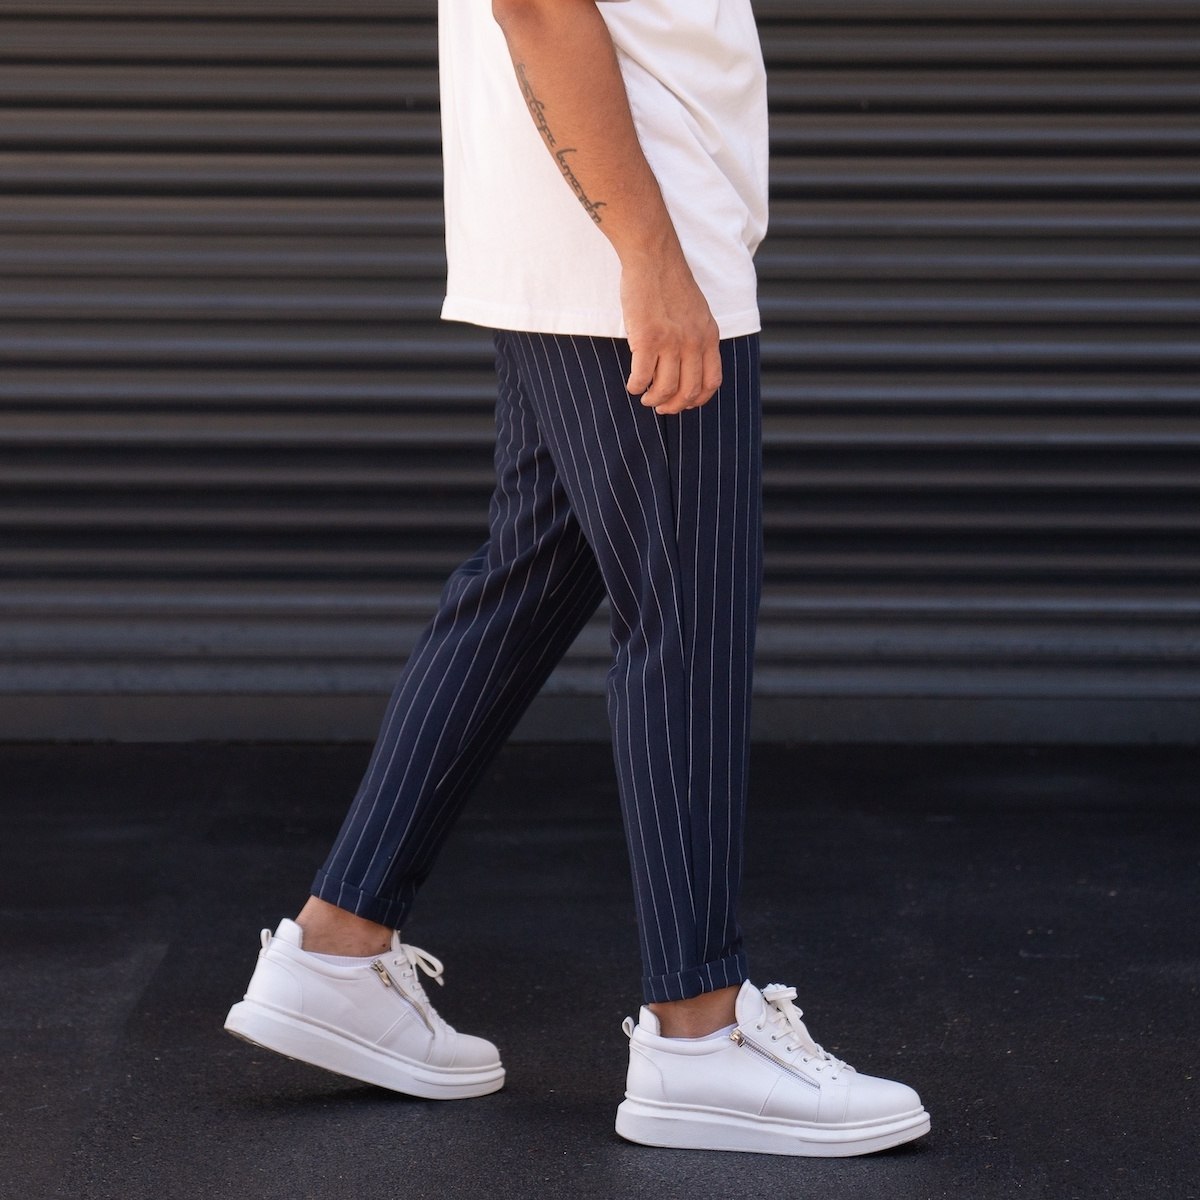 Buy Blue White Stripe Men Pant Cotton Handloom for Best Price, Reviews,  Free Shipping